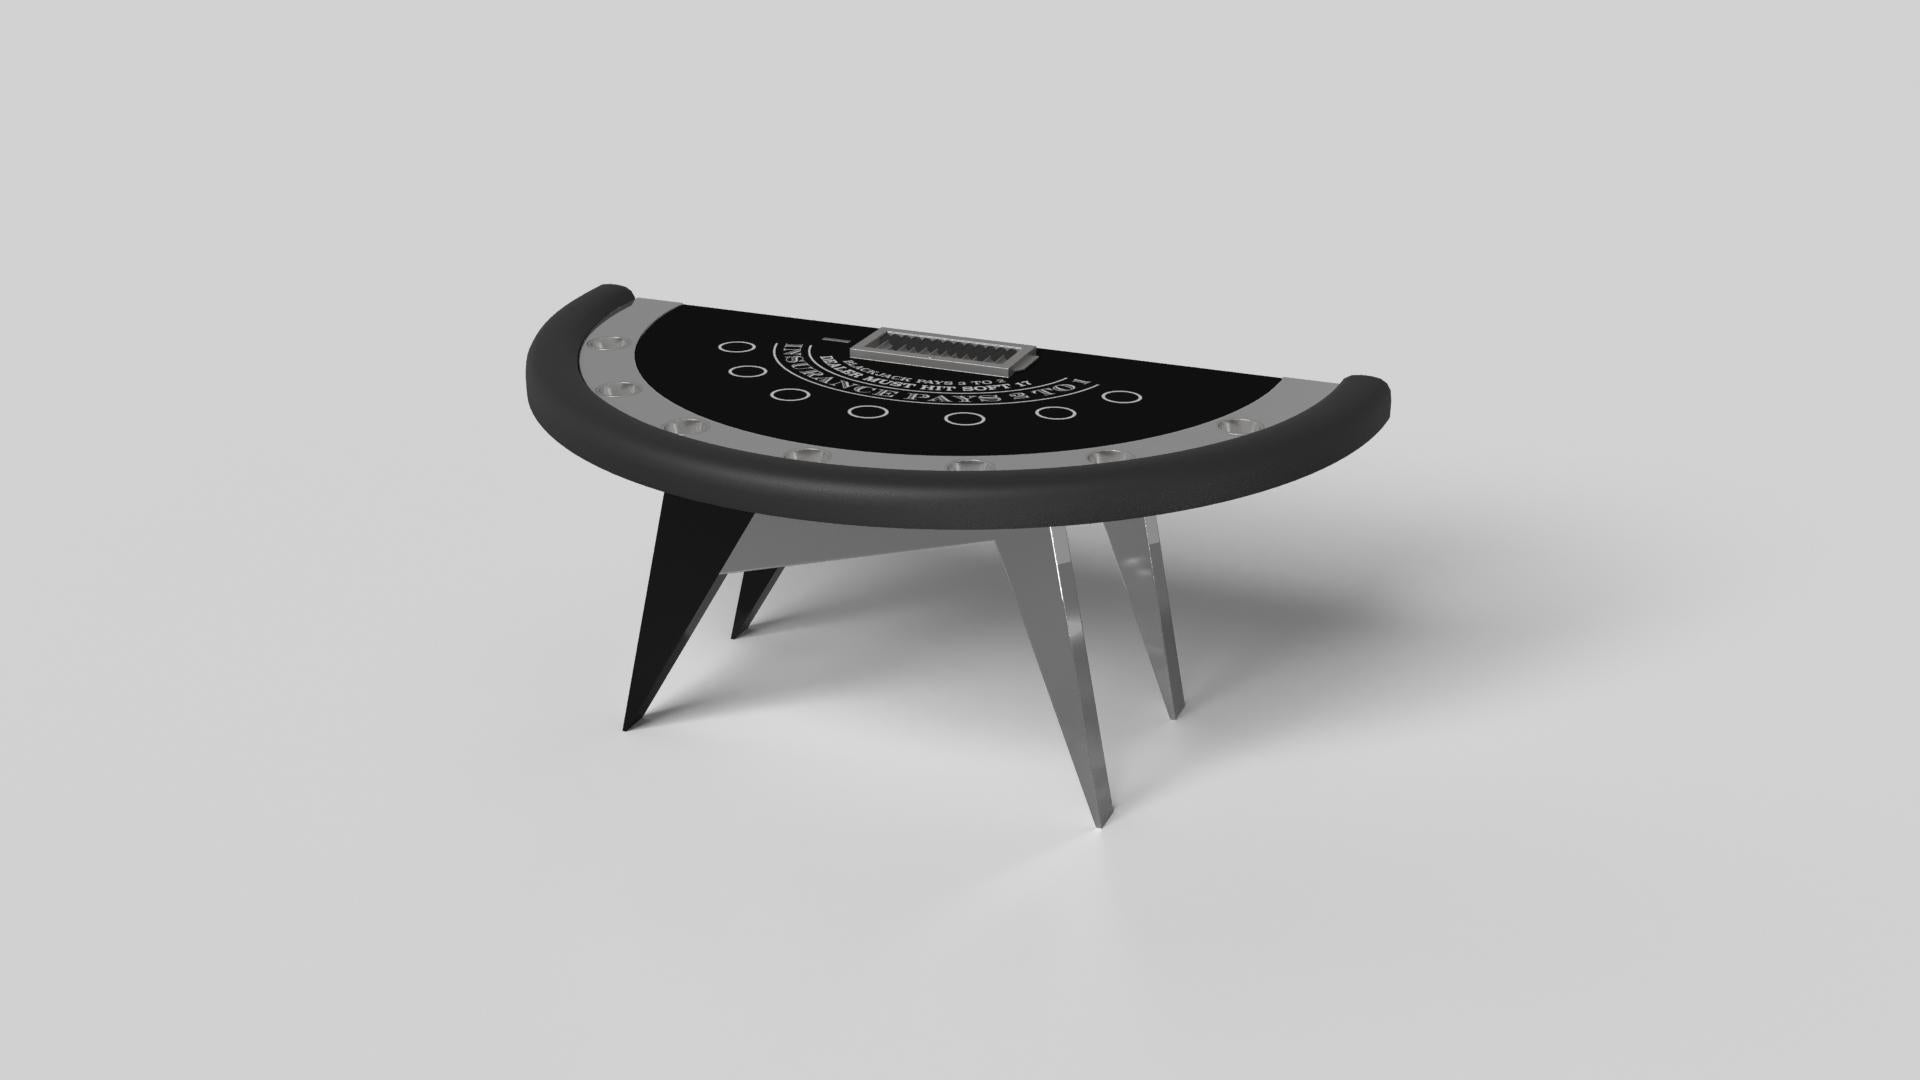 Simple yet sophisticated, the Mantis blackjack table puts a fresh, modern spin on a classic four-legged design. Sharp angles and tapered legs provide sleek stability.

Size:

88”X46”X30” (Dining Height)
Custom Sizes Available Per Request